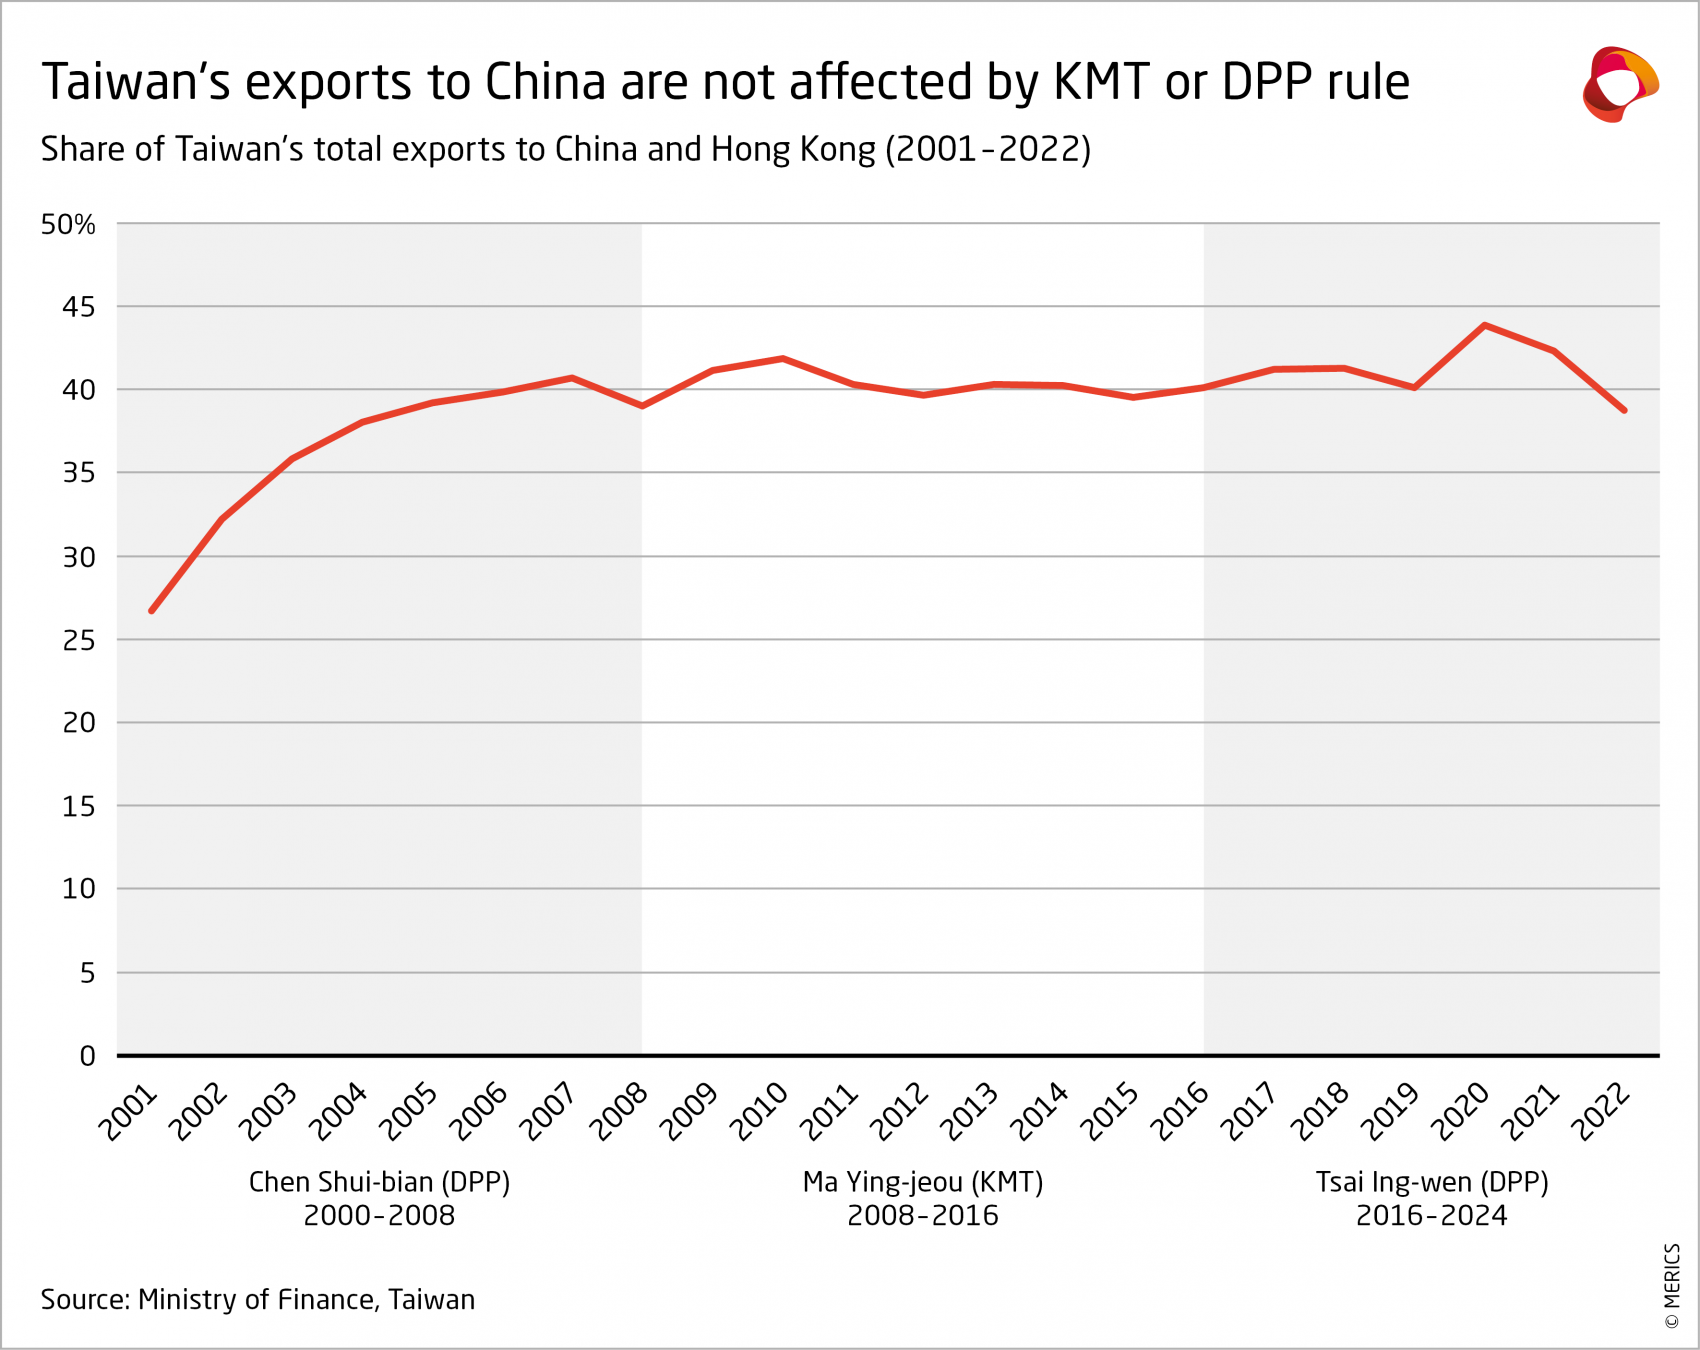 merics-taiwans-exports-to-china-are-not-affected-by-kmt-or-dpp-rule 2.png